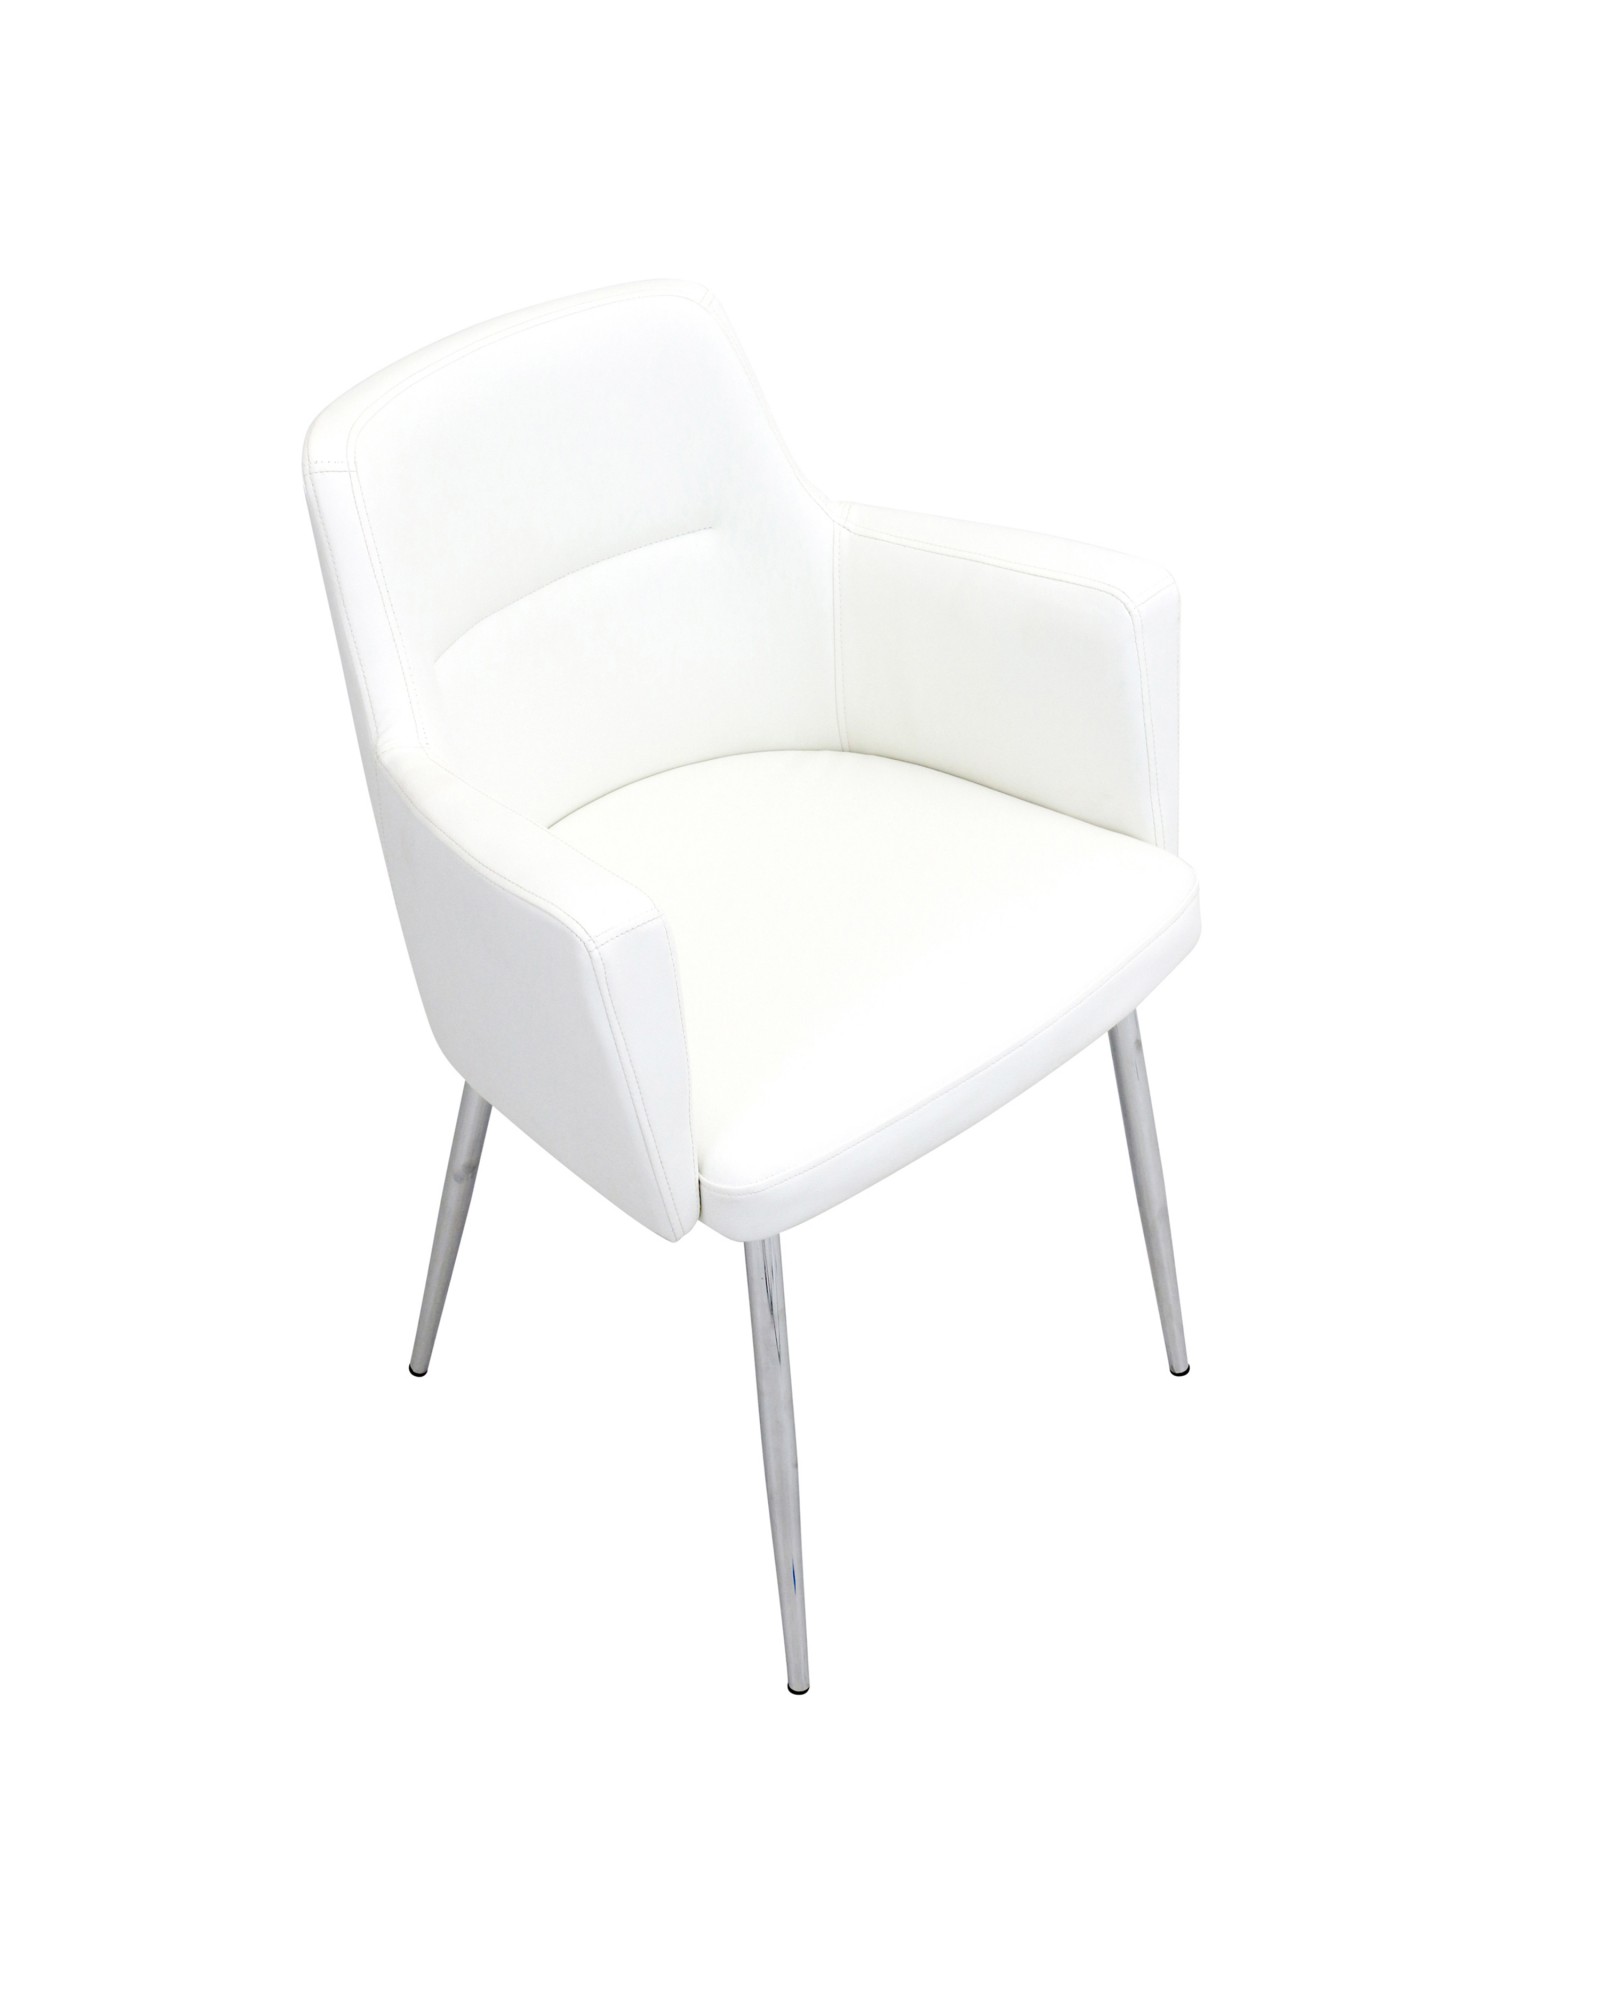 Andrew Contemporary Dining/Accent Chair in Chrome and White Faux Leather - Set of 2